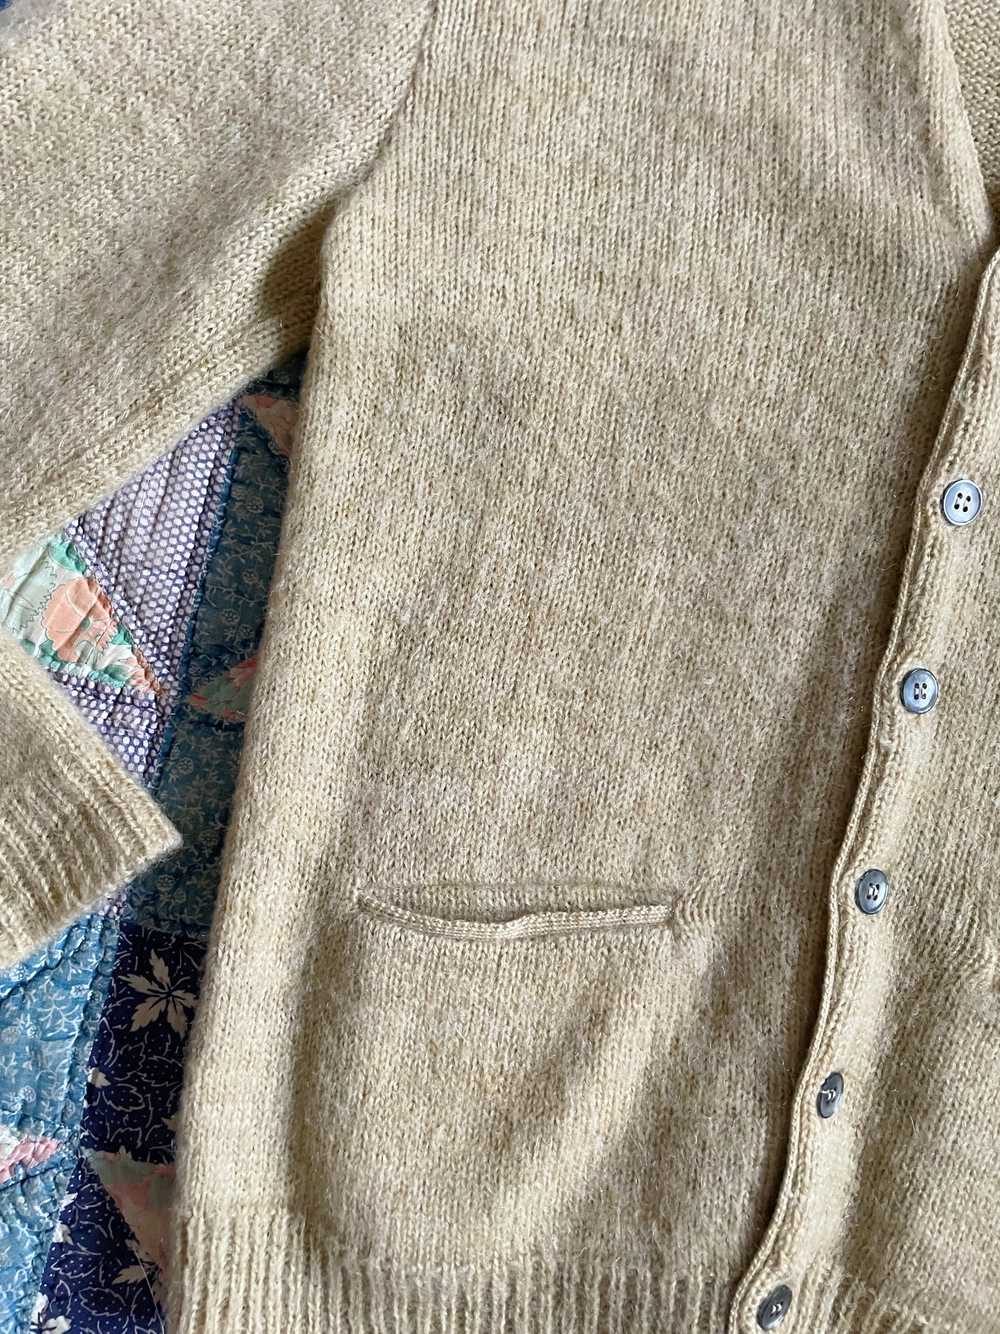 1960s Beige Wool and Mohair Knit Cardigan - image 2